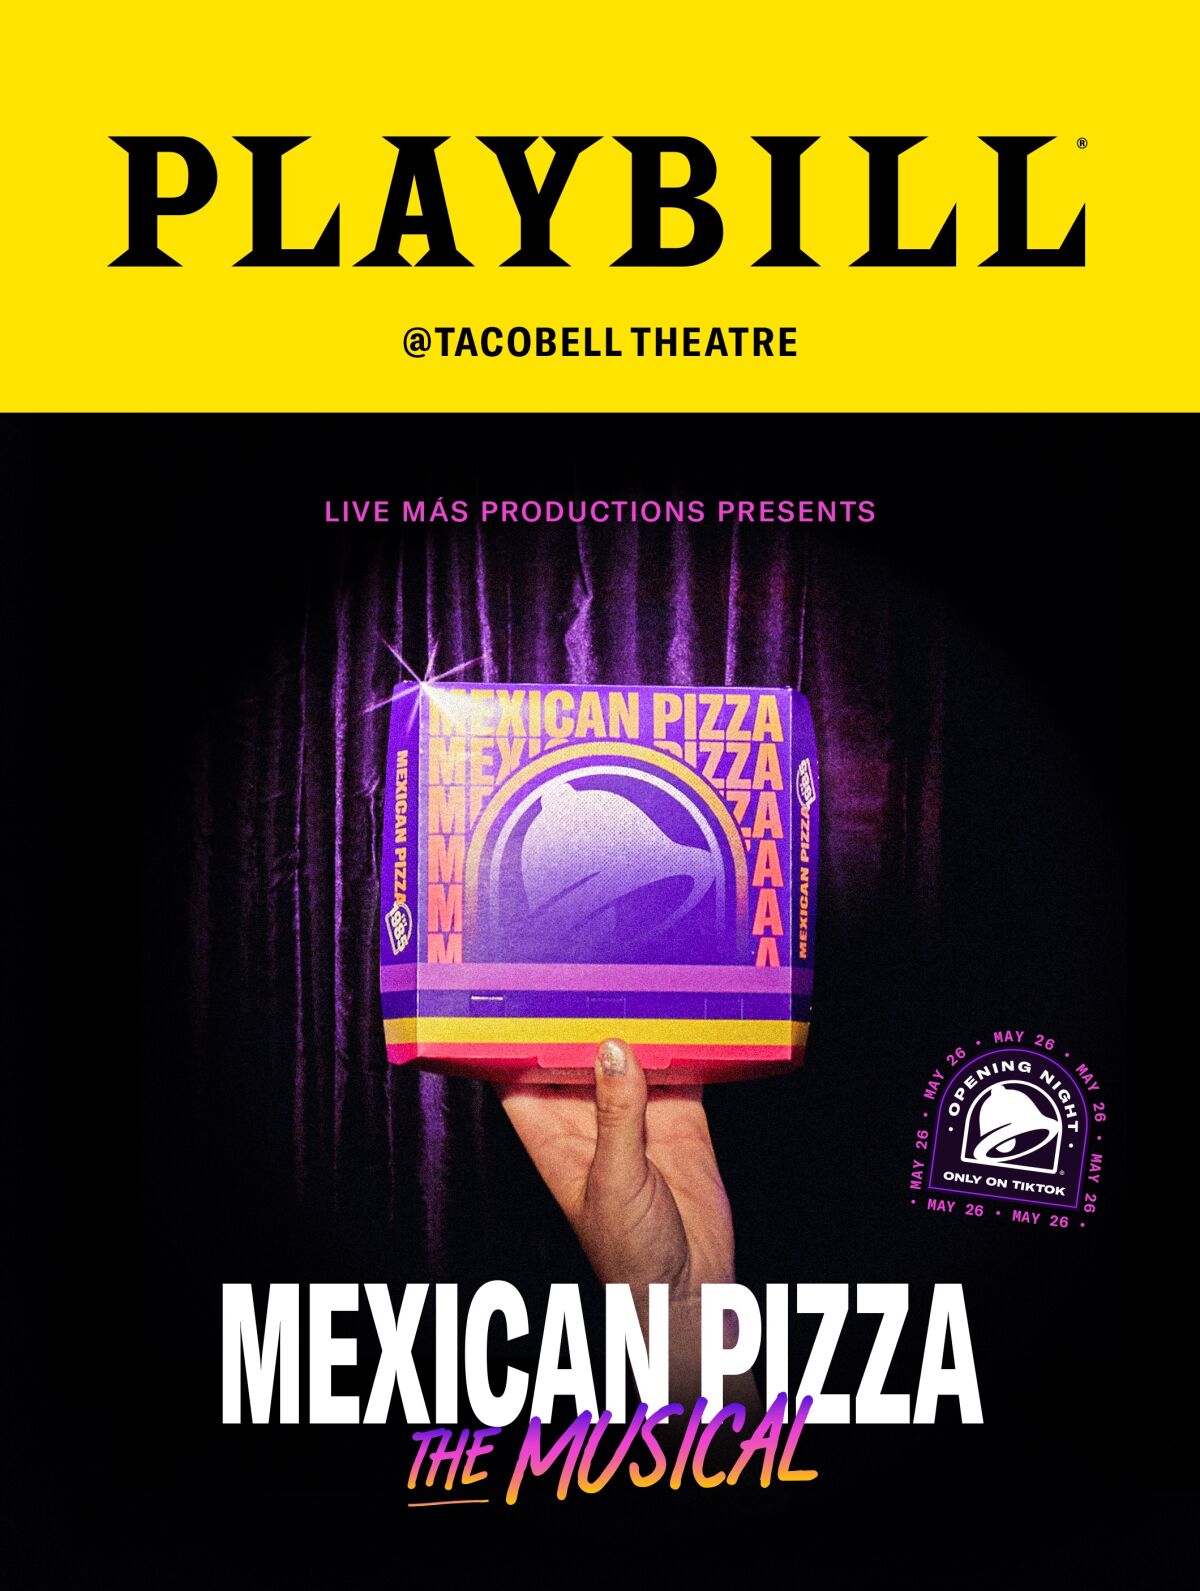 A faux Playbill features the words "Mexican Pizza: The Musical" and the box that holds the Taco Bell item.